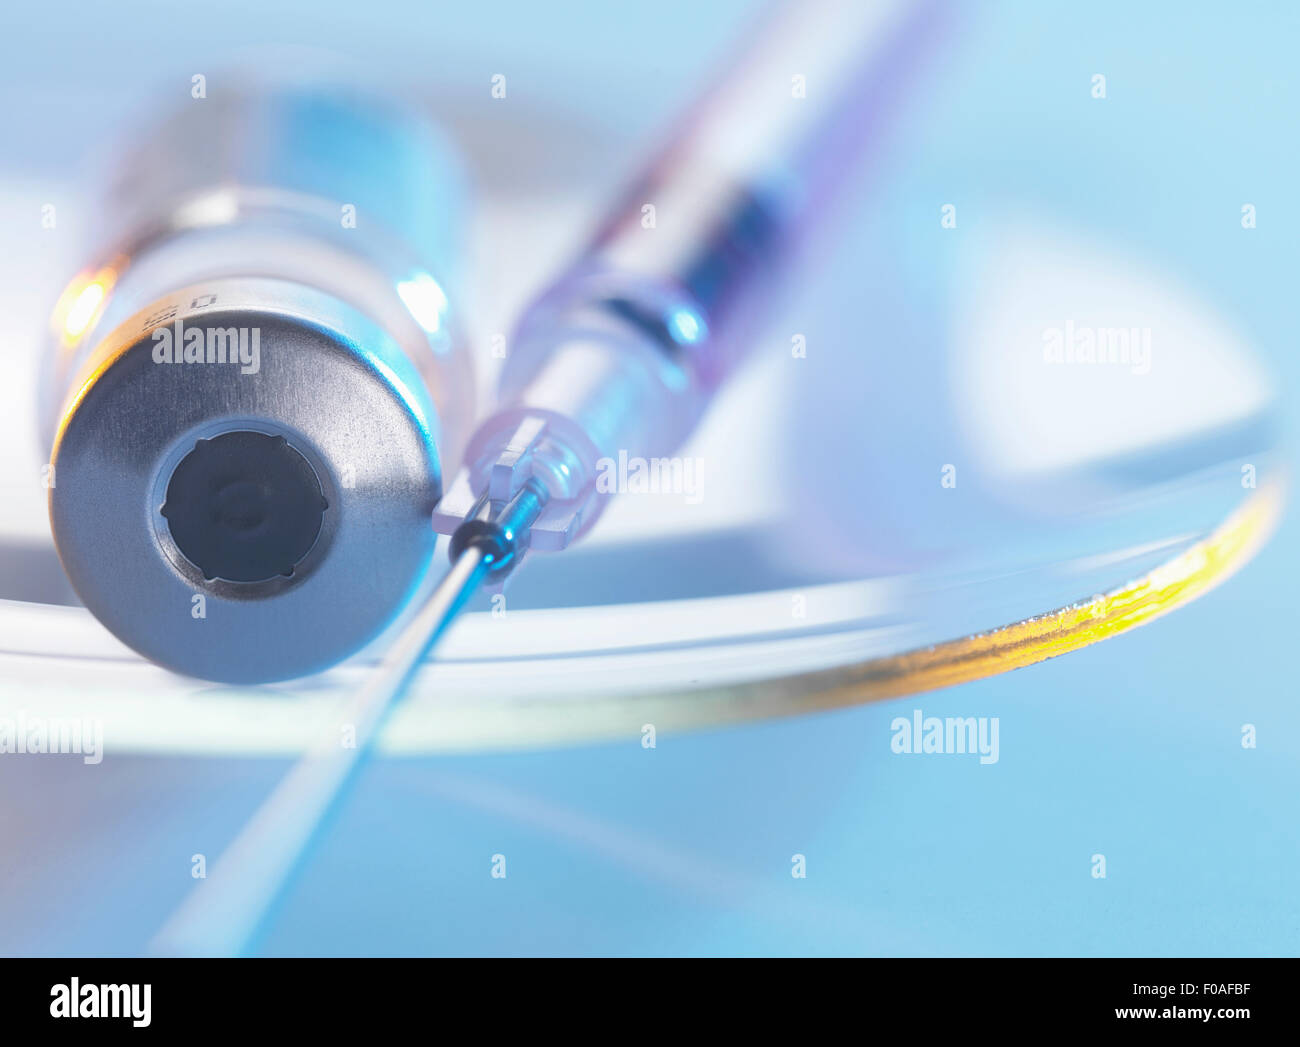 Vaccine and hypodermic syringe sitting on a glass dish Stock Photo